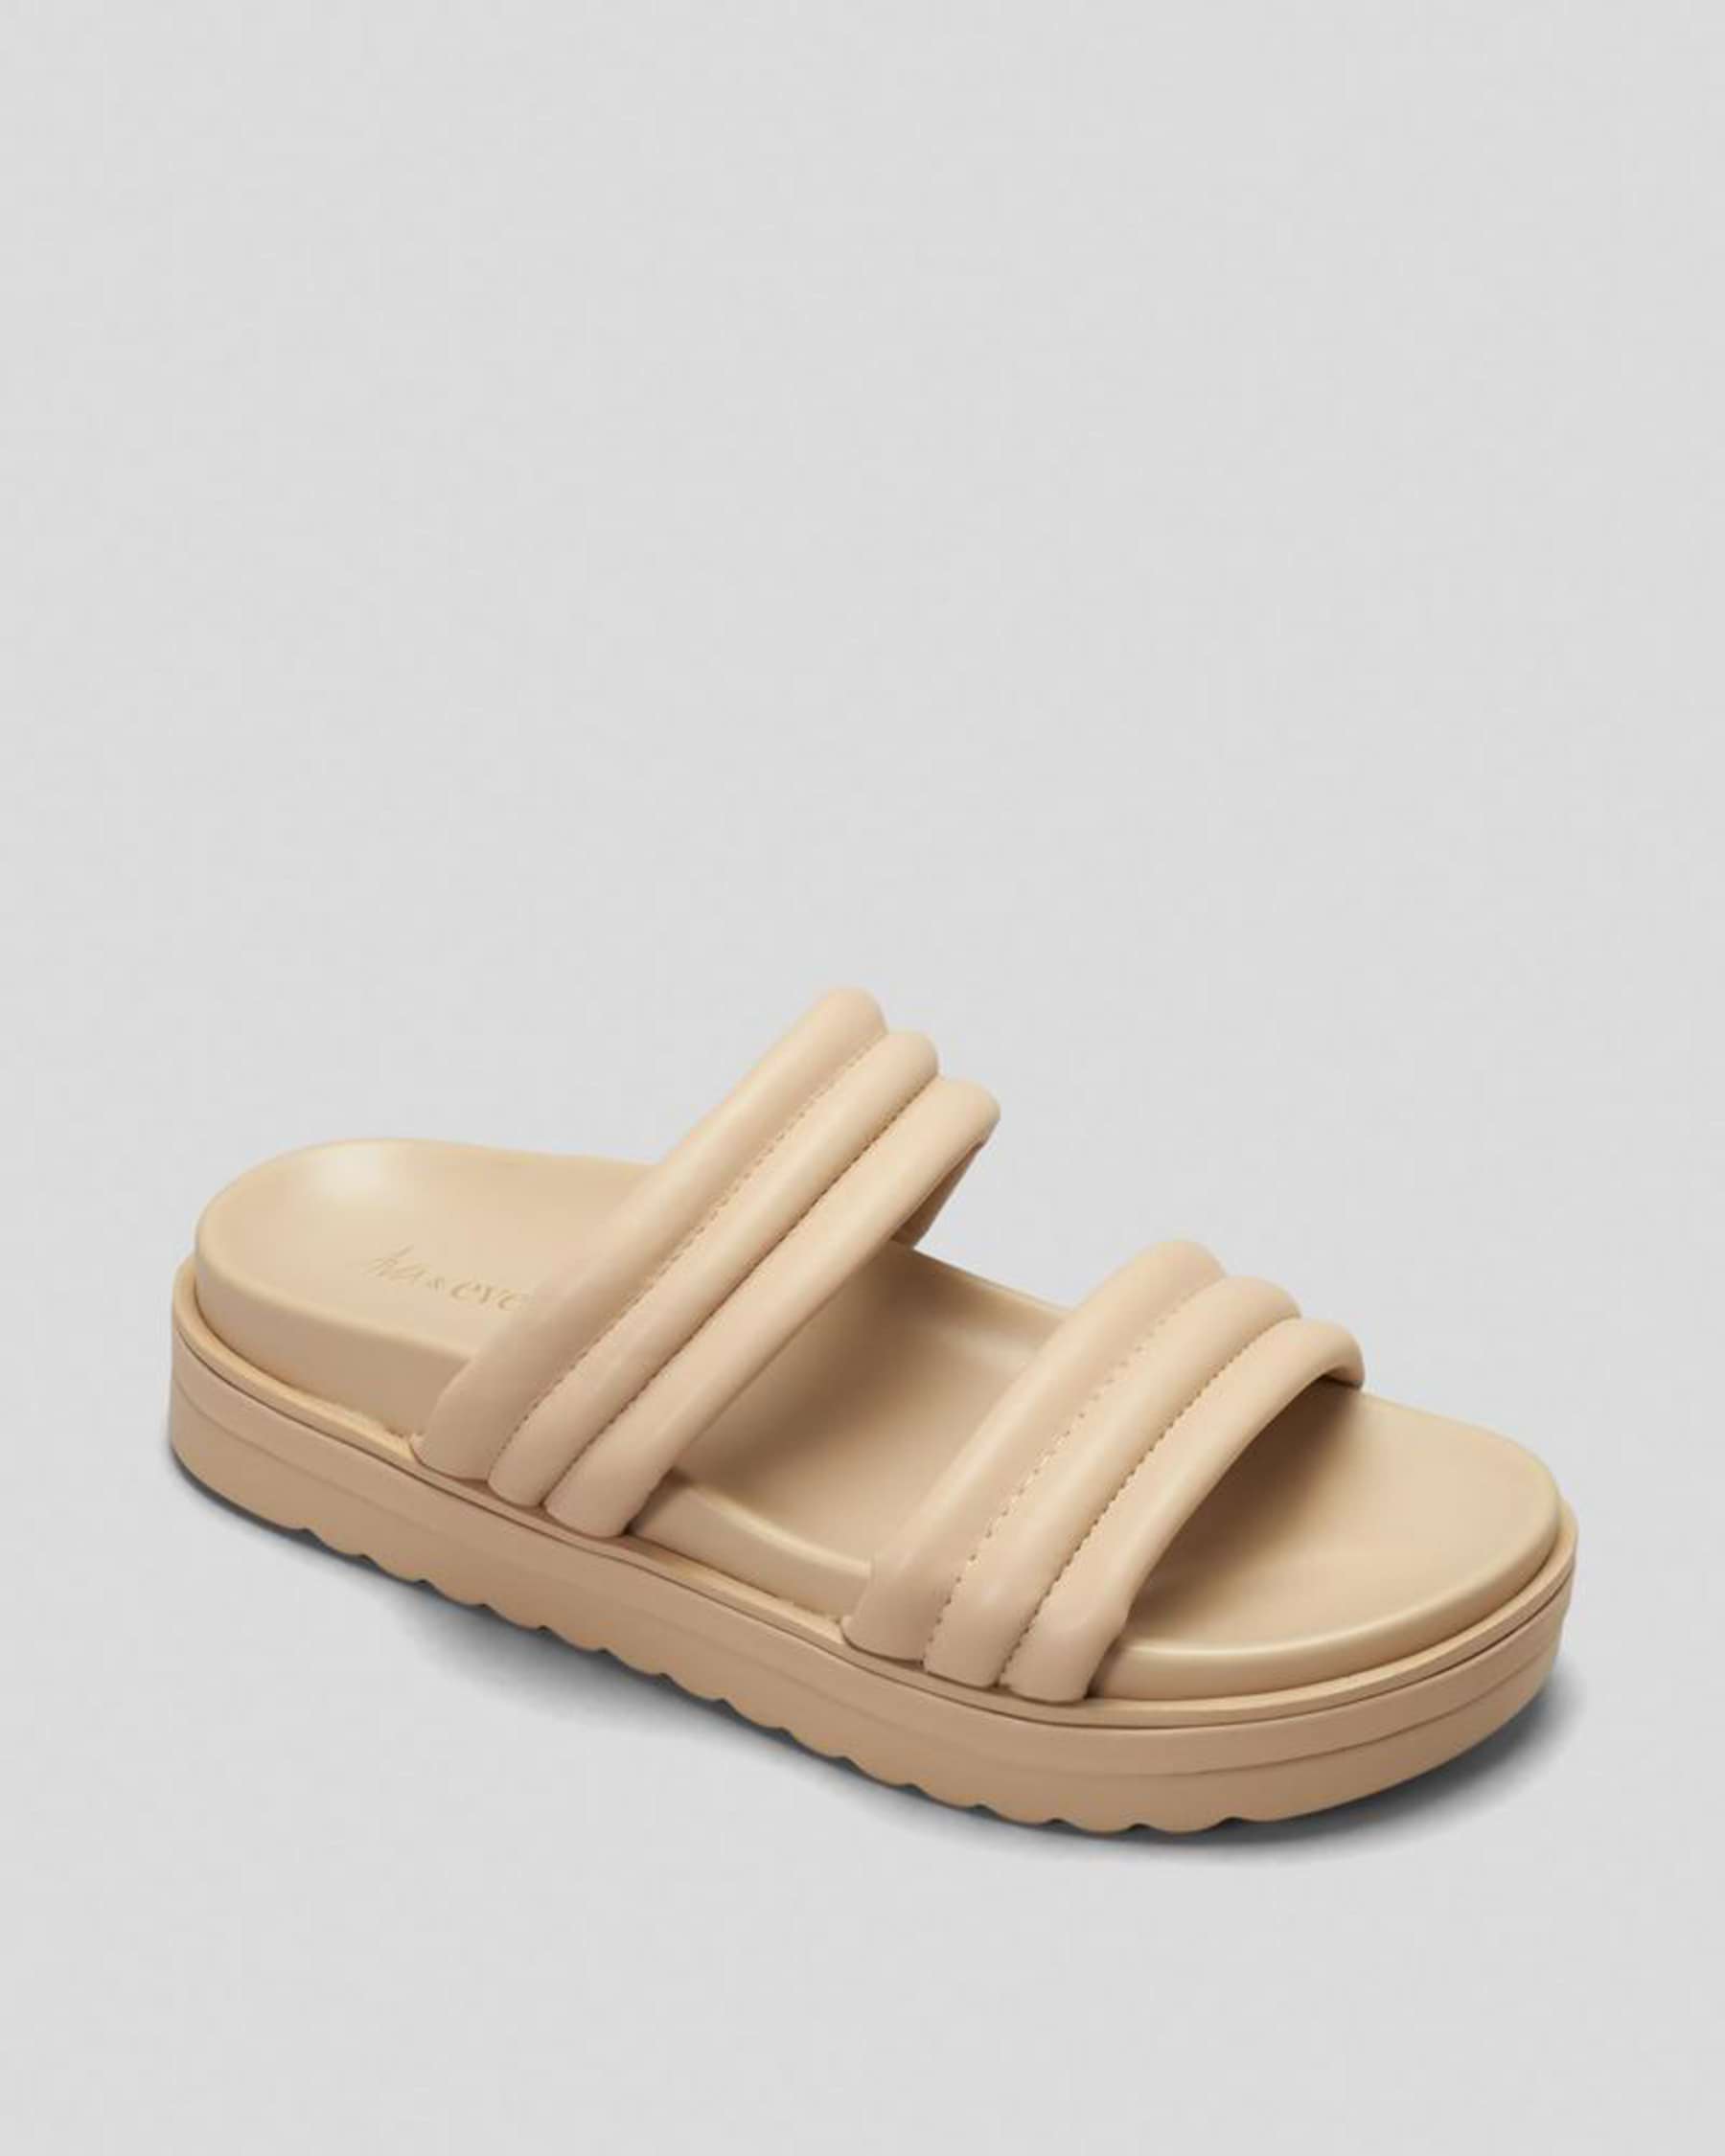 Shop Ava And Ever Rhodes Slide Sandals In Sand - Fast Shipping & Easy ...